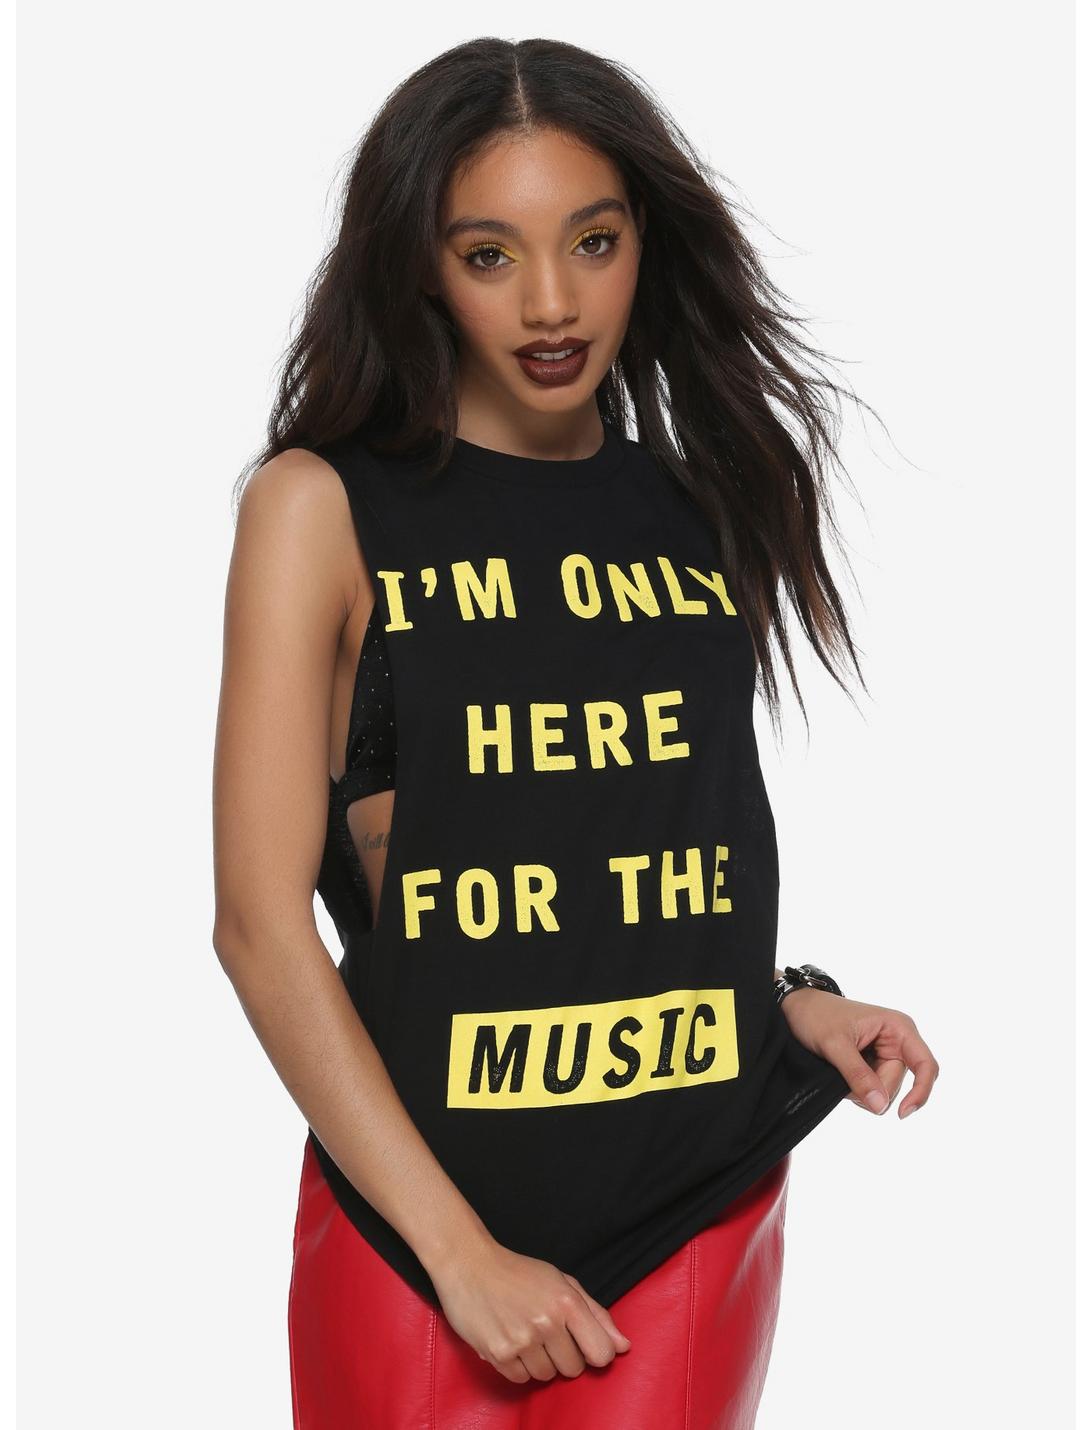 Here For The Music Girls Muscle Top, BLACK, hi-res